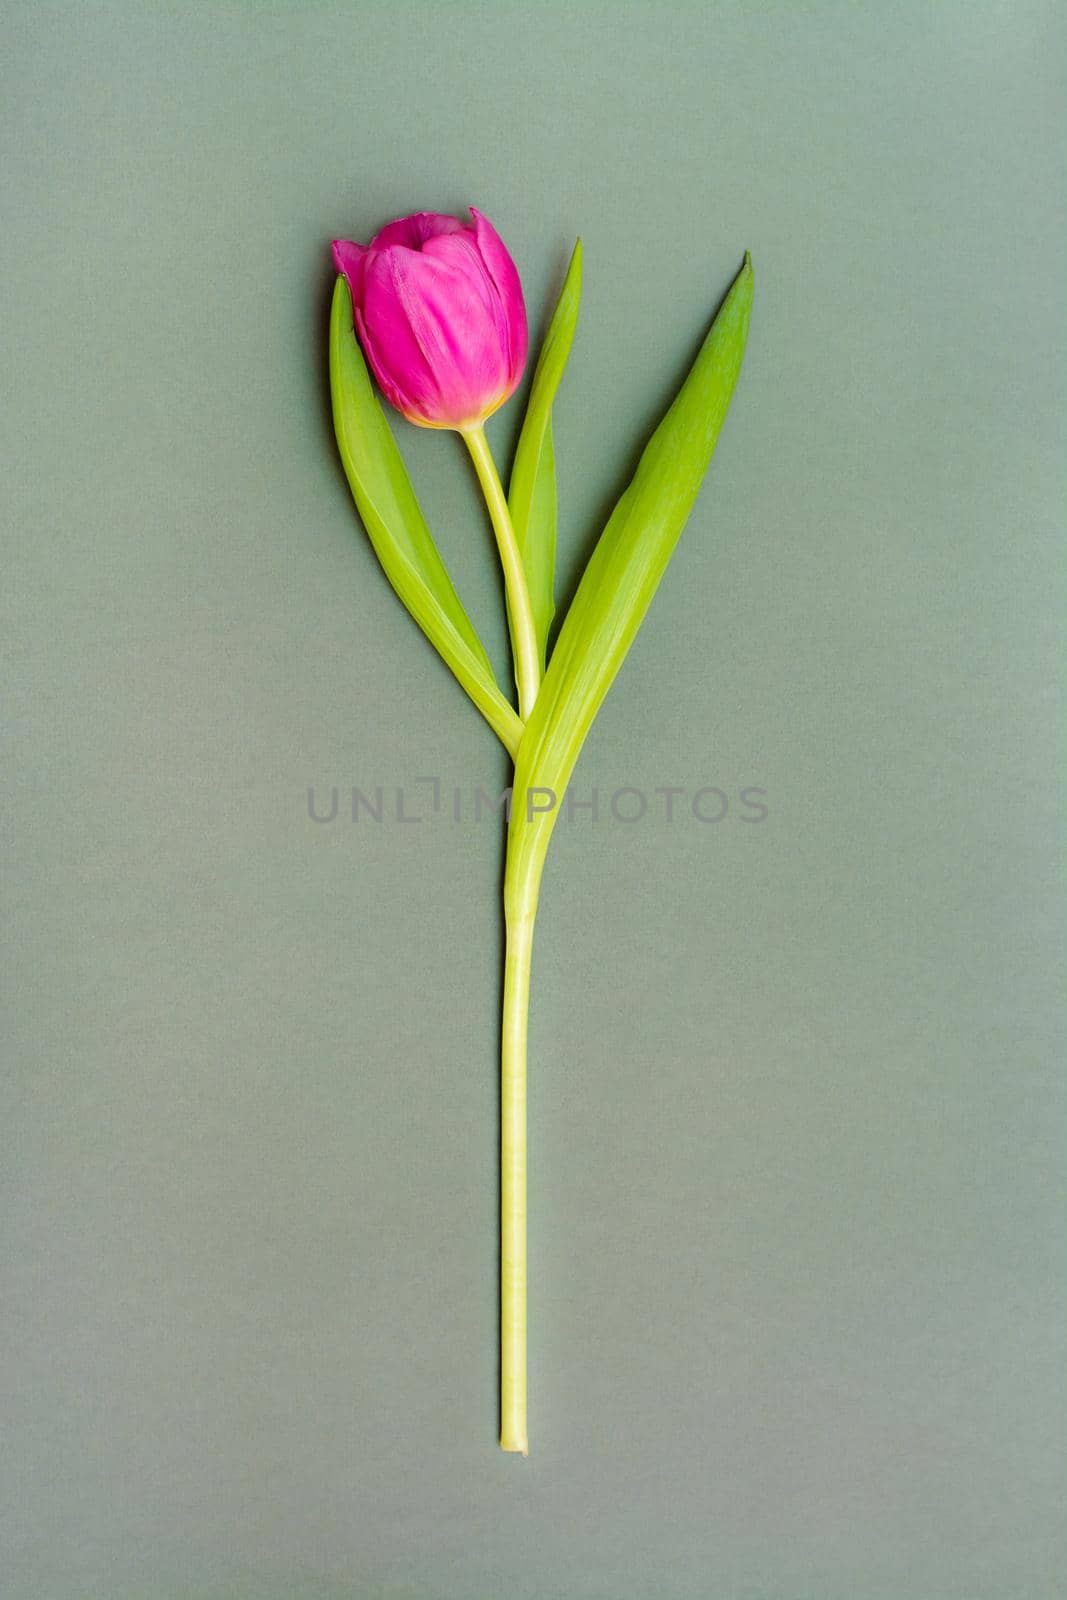 Lonely pink tulip with green leaves on a solid dark background. Copy space. Vertical view by Aleruana